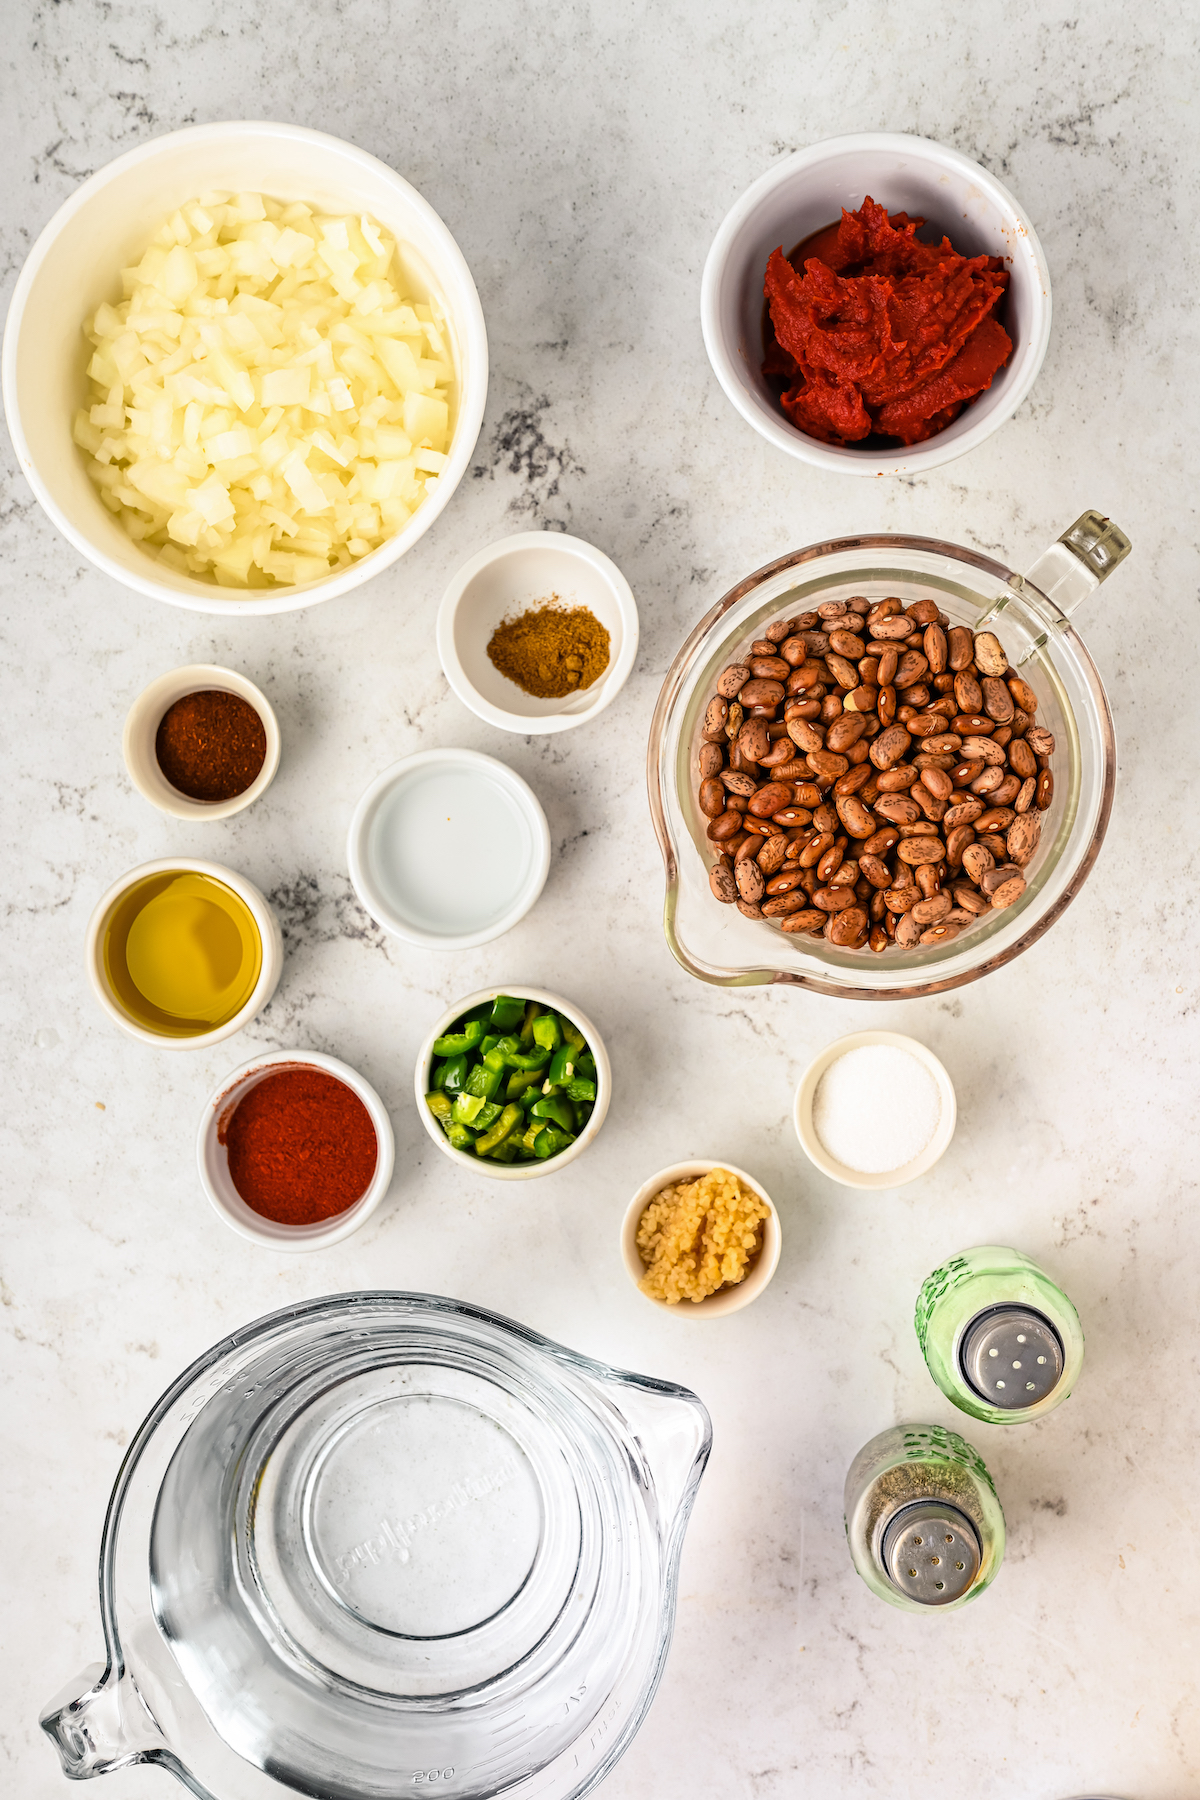 Ingredients for ranch-style beans.